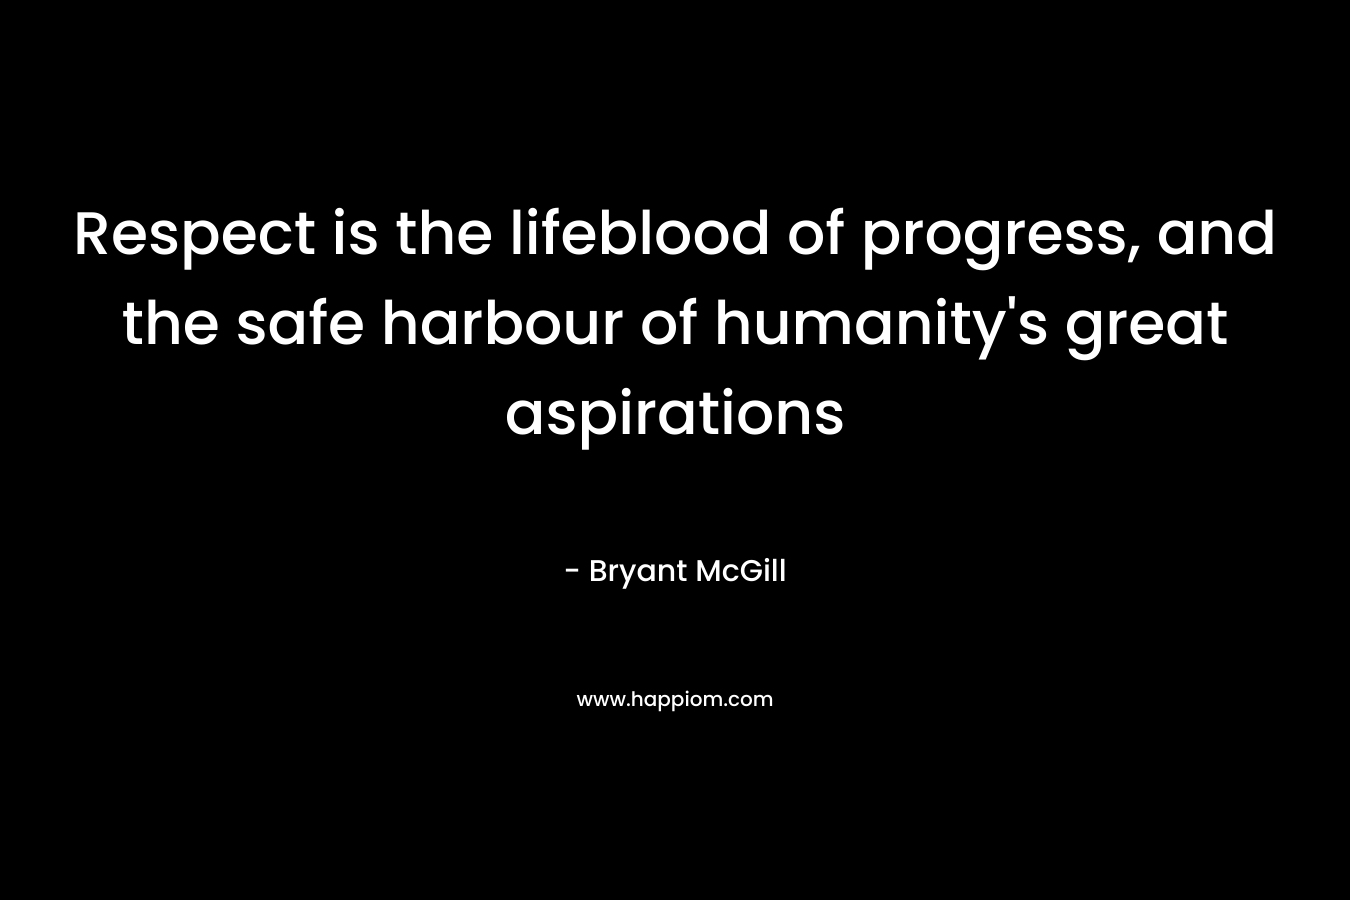 Respect is the lifeblood of progress, and the safe harbour of humanity’s great aspirations – Bryant McGill